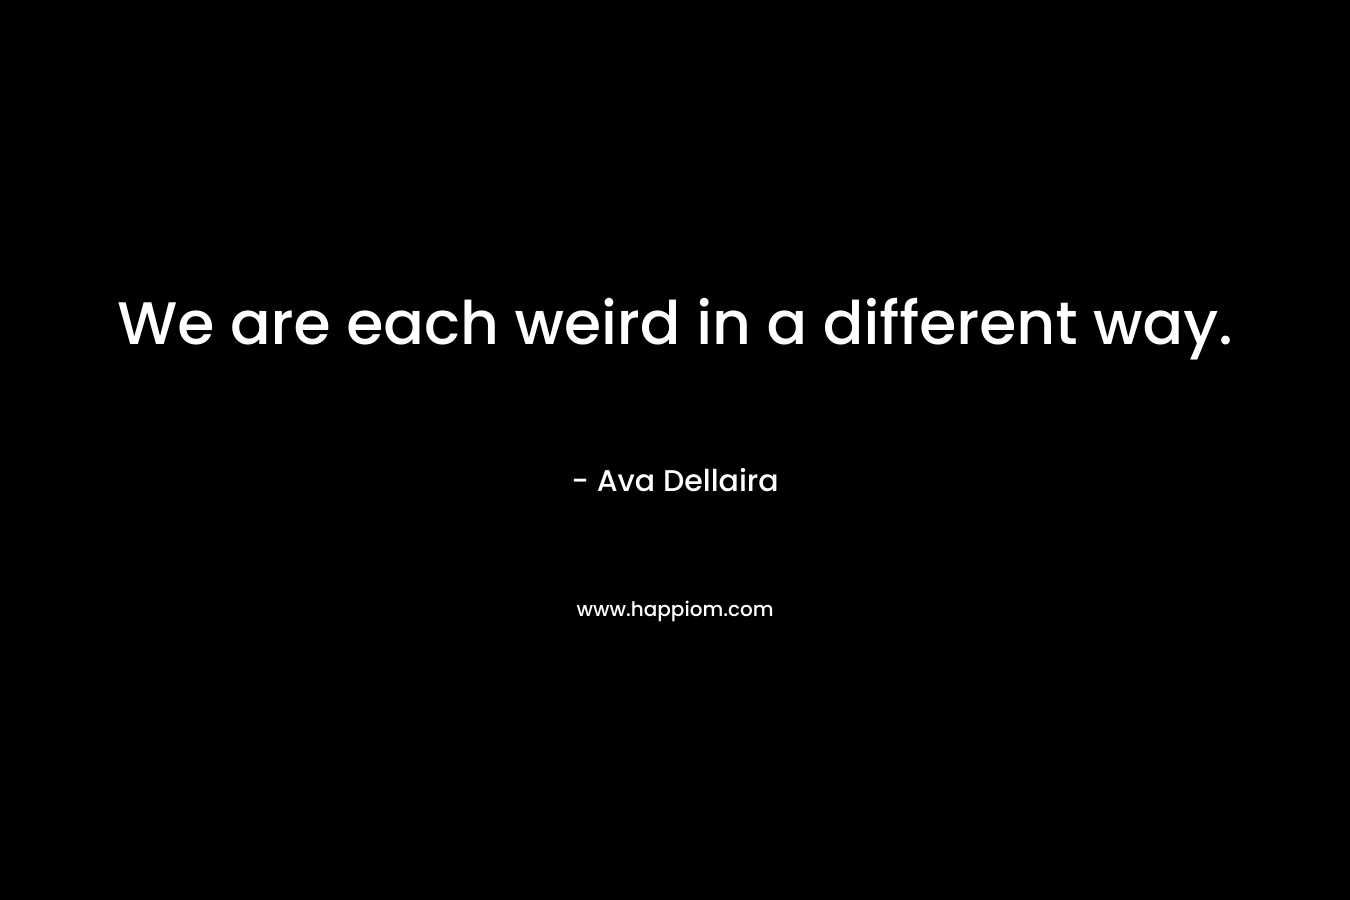 We are each weird in a different way. – Ava Dellaira